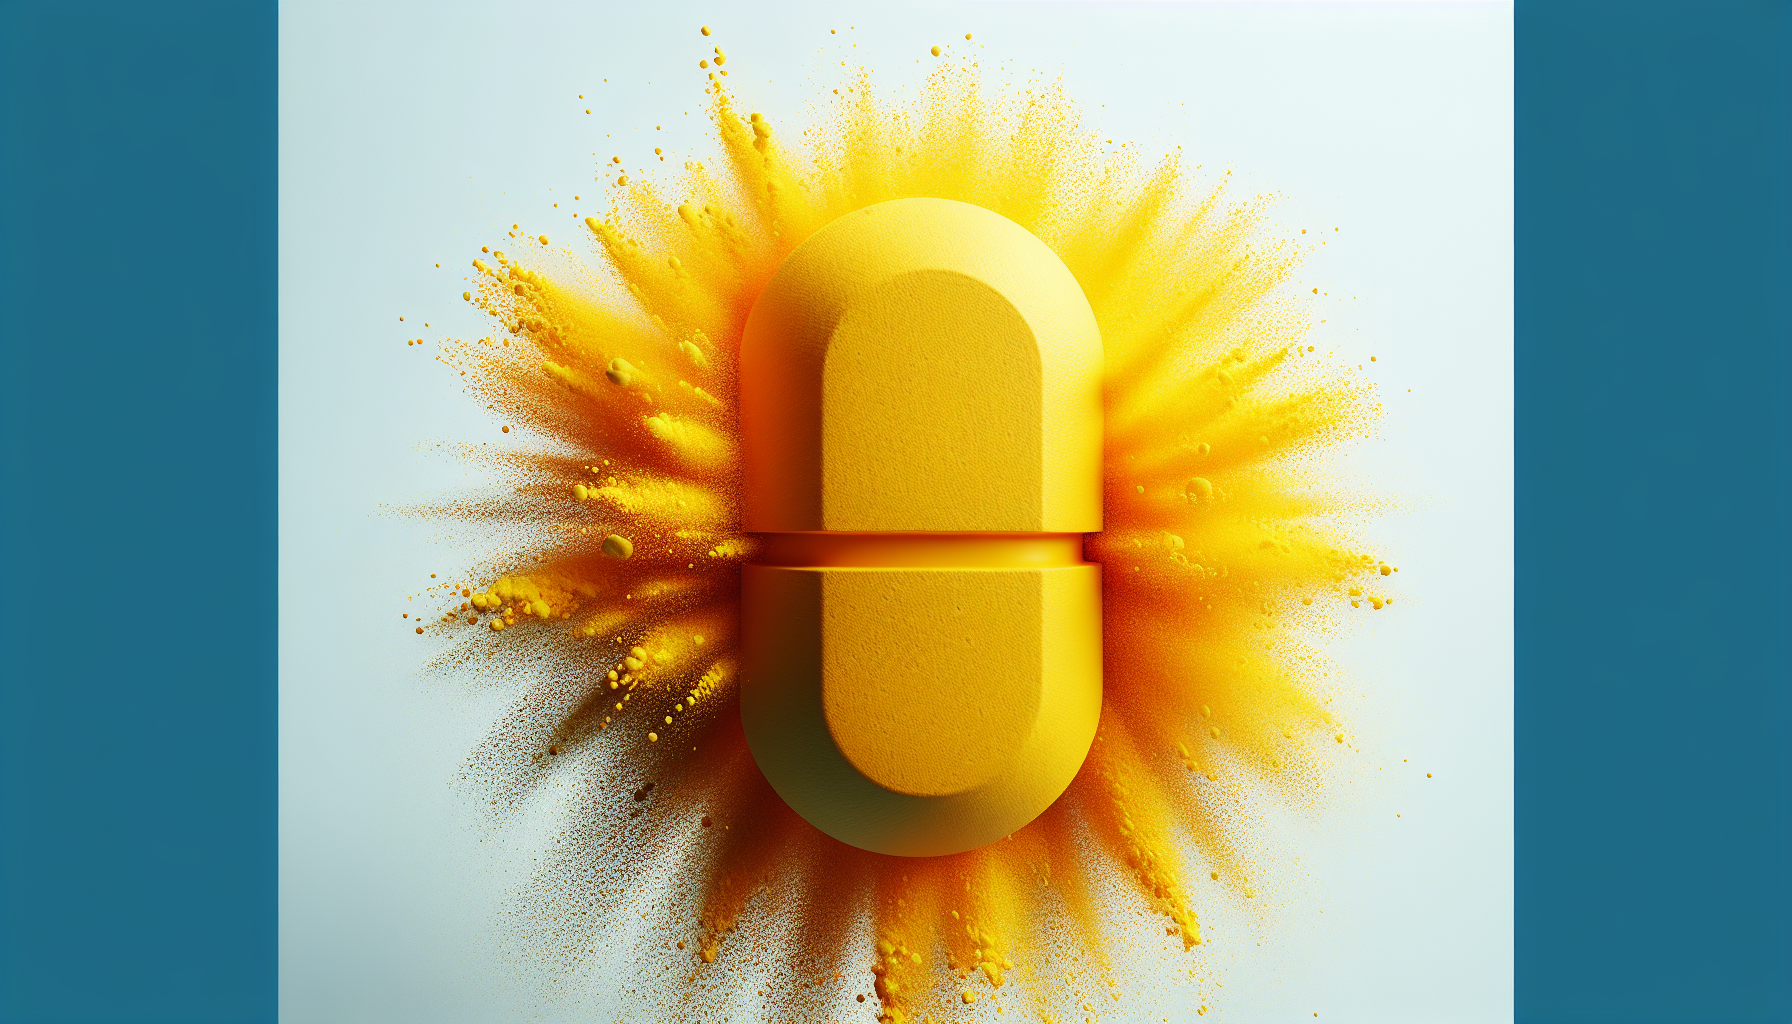 What Is A Stronger Antibiotic Than AMOX?